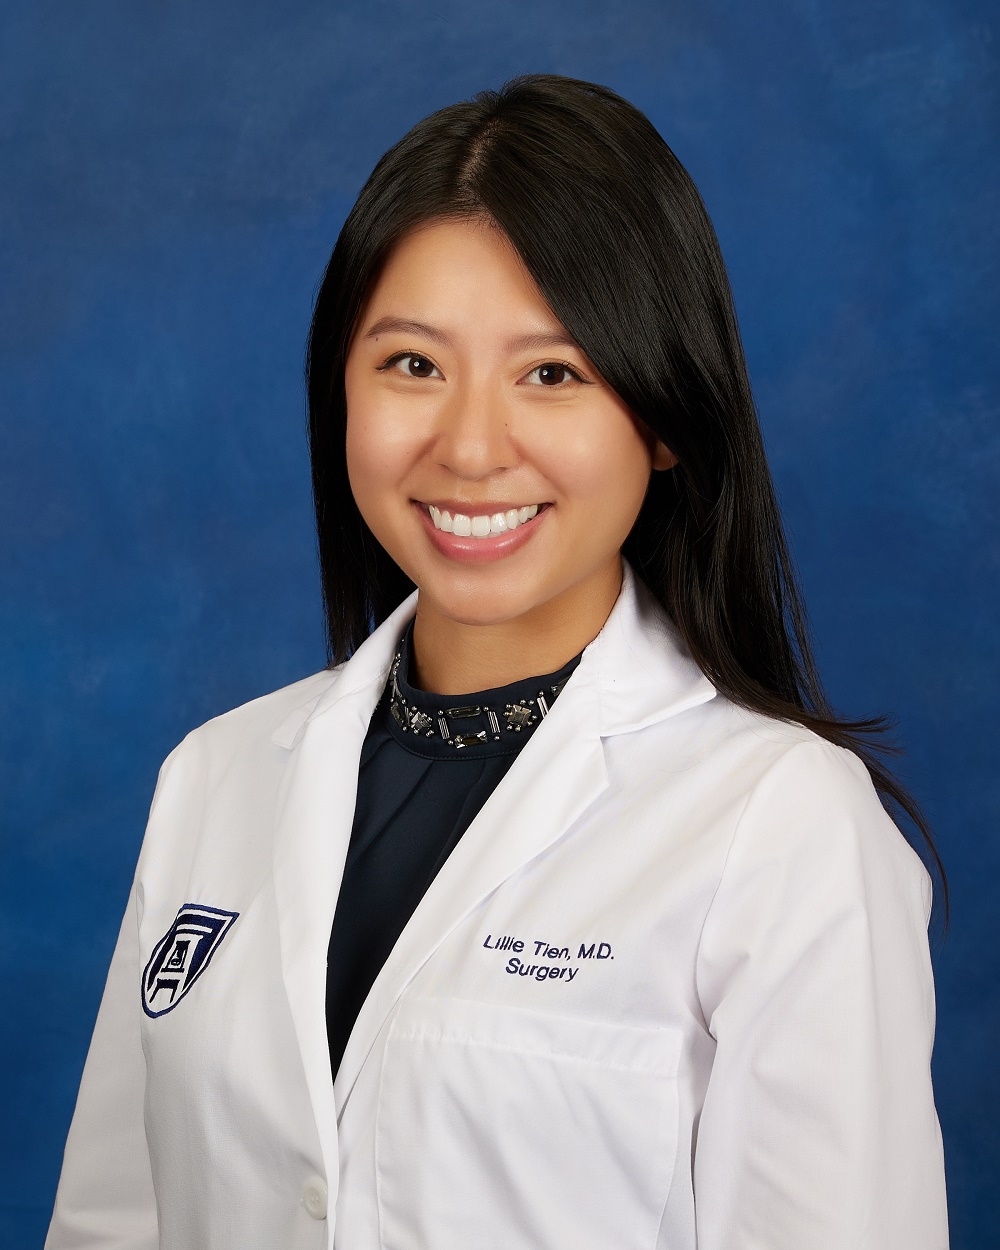 photo of Lillie Tien, MD